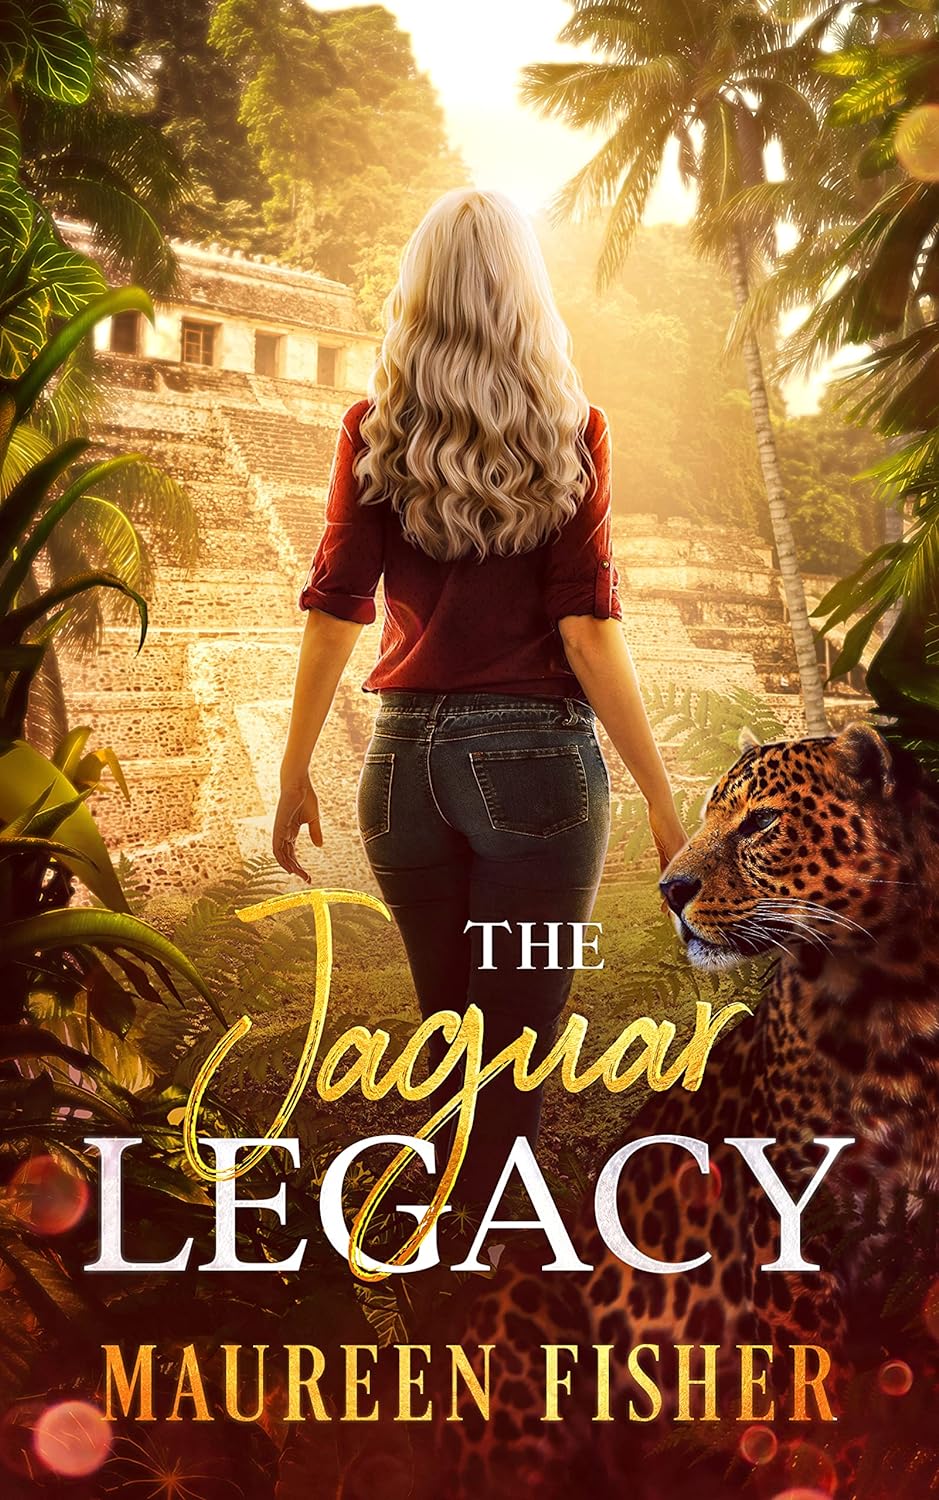 The Jaguar Legacy by Maureen Fisher 2016